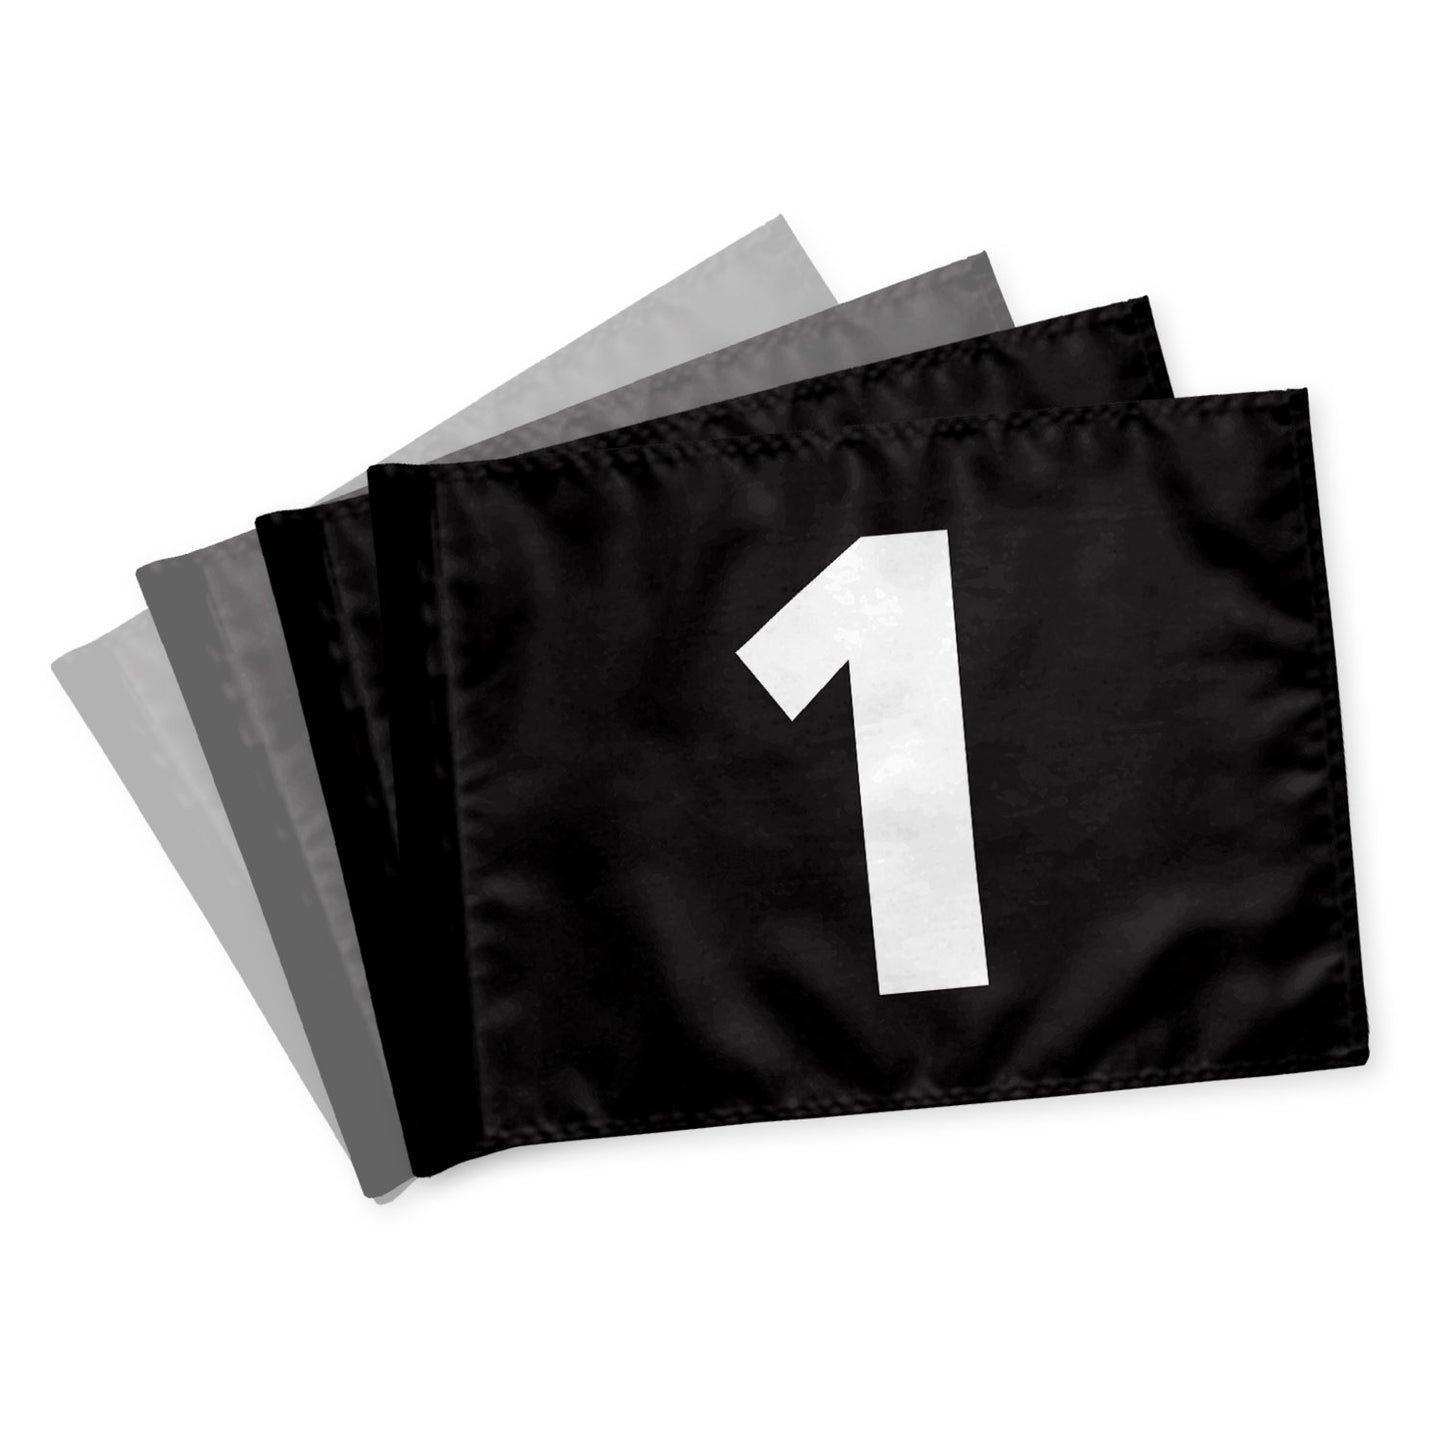 Puttinggreenflags 1-9, stiffened,  black with white numbers, 200 gram fabric